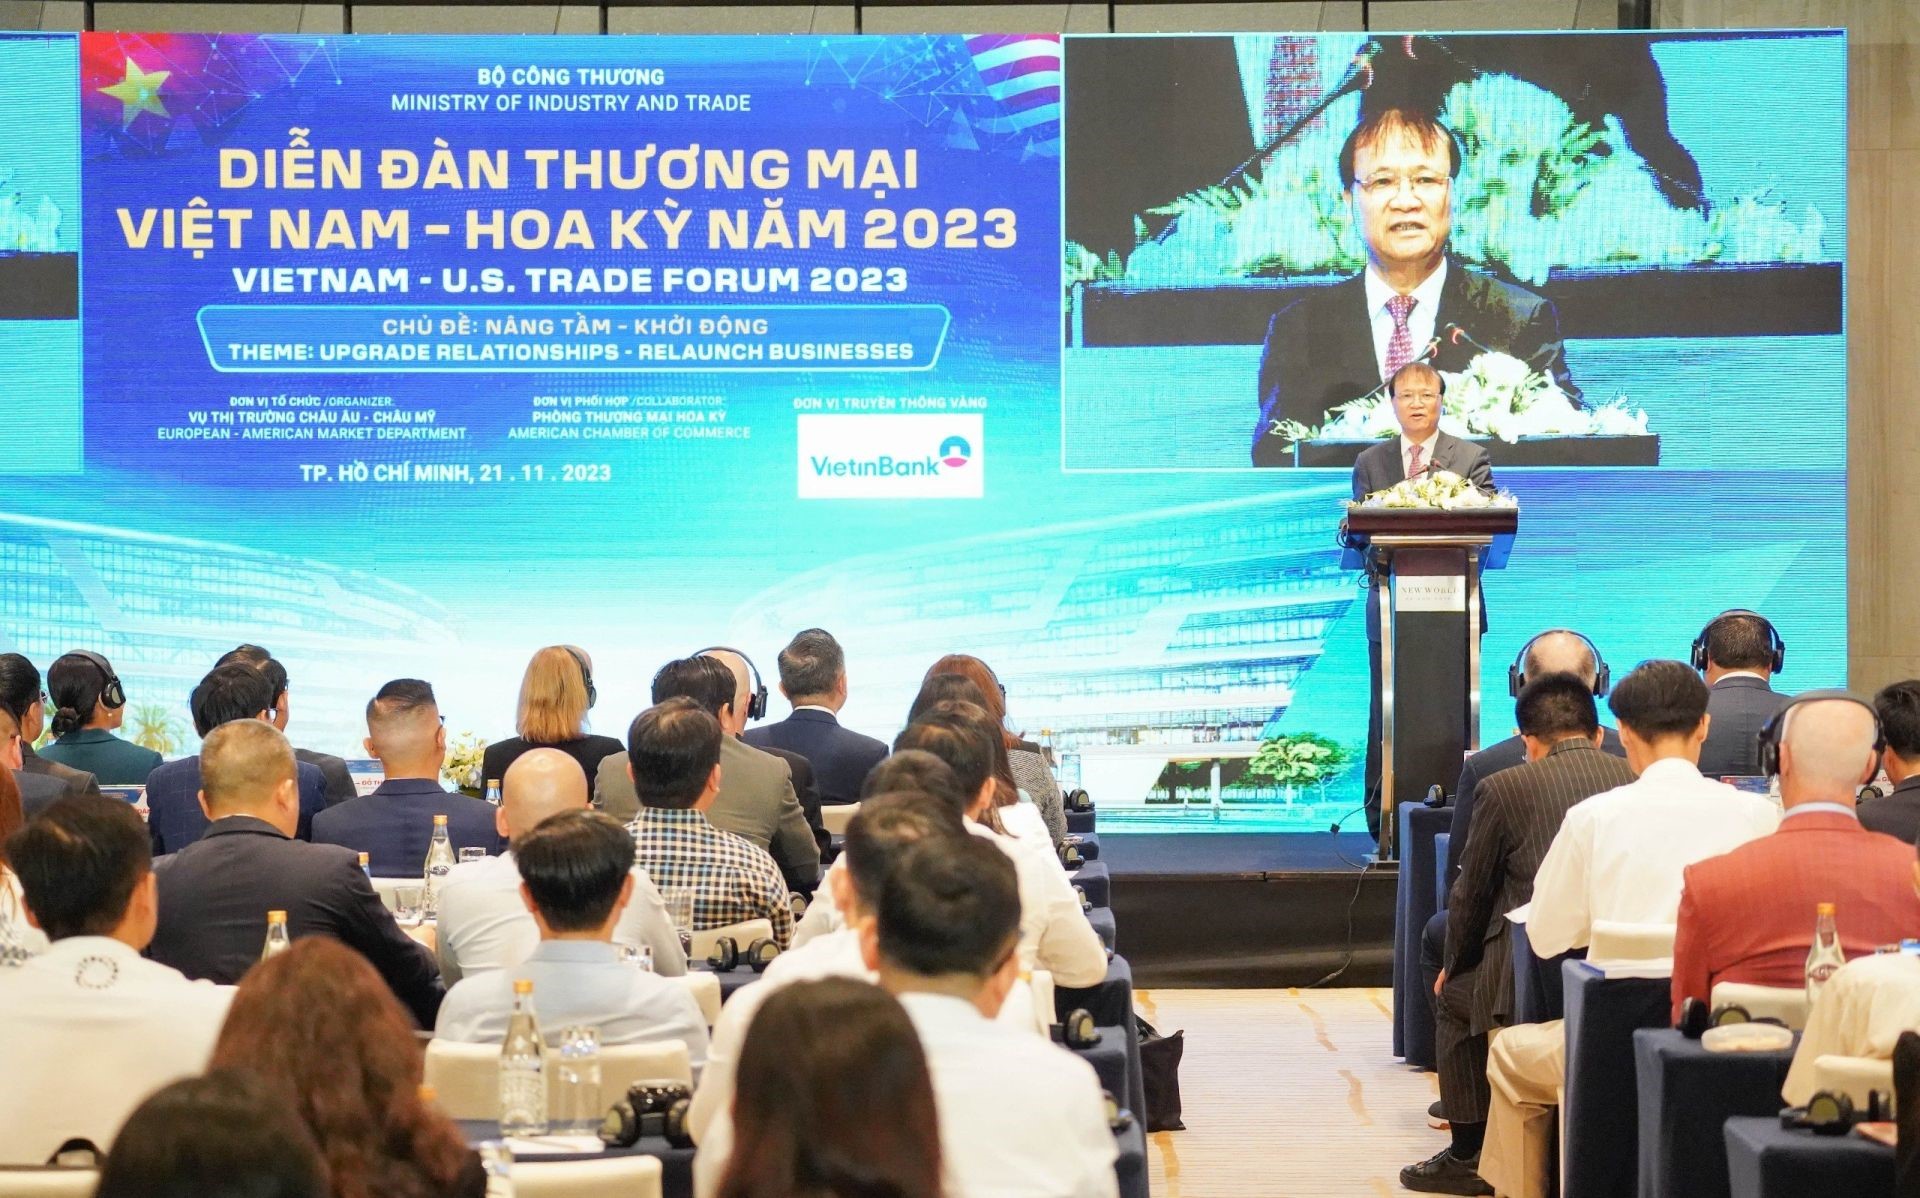 Vietnam has been transforming strongly to become a major global manufacturing center.